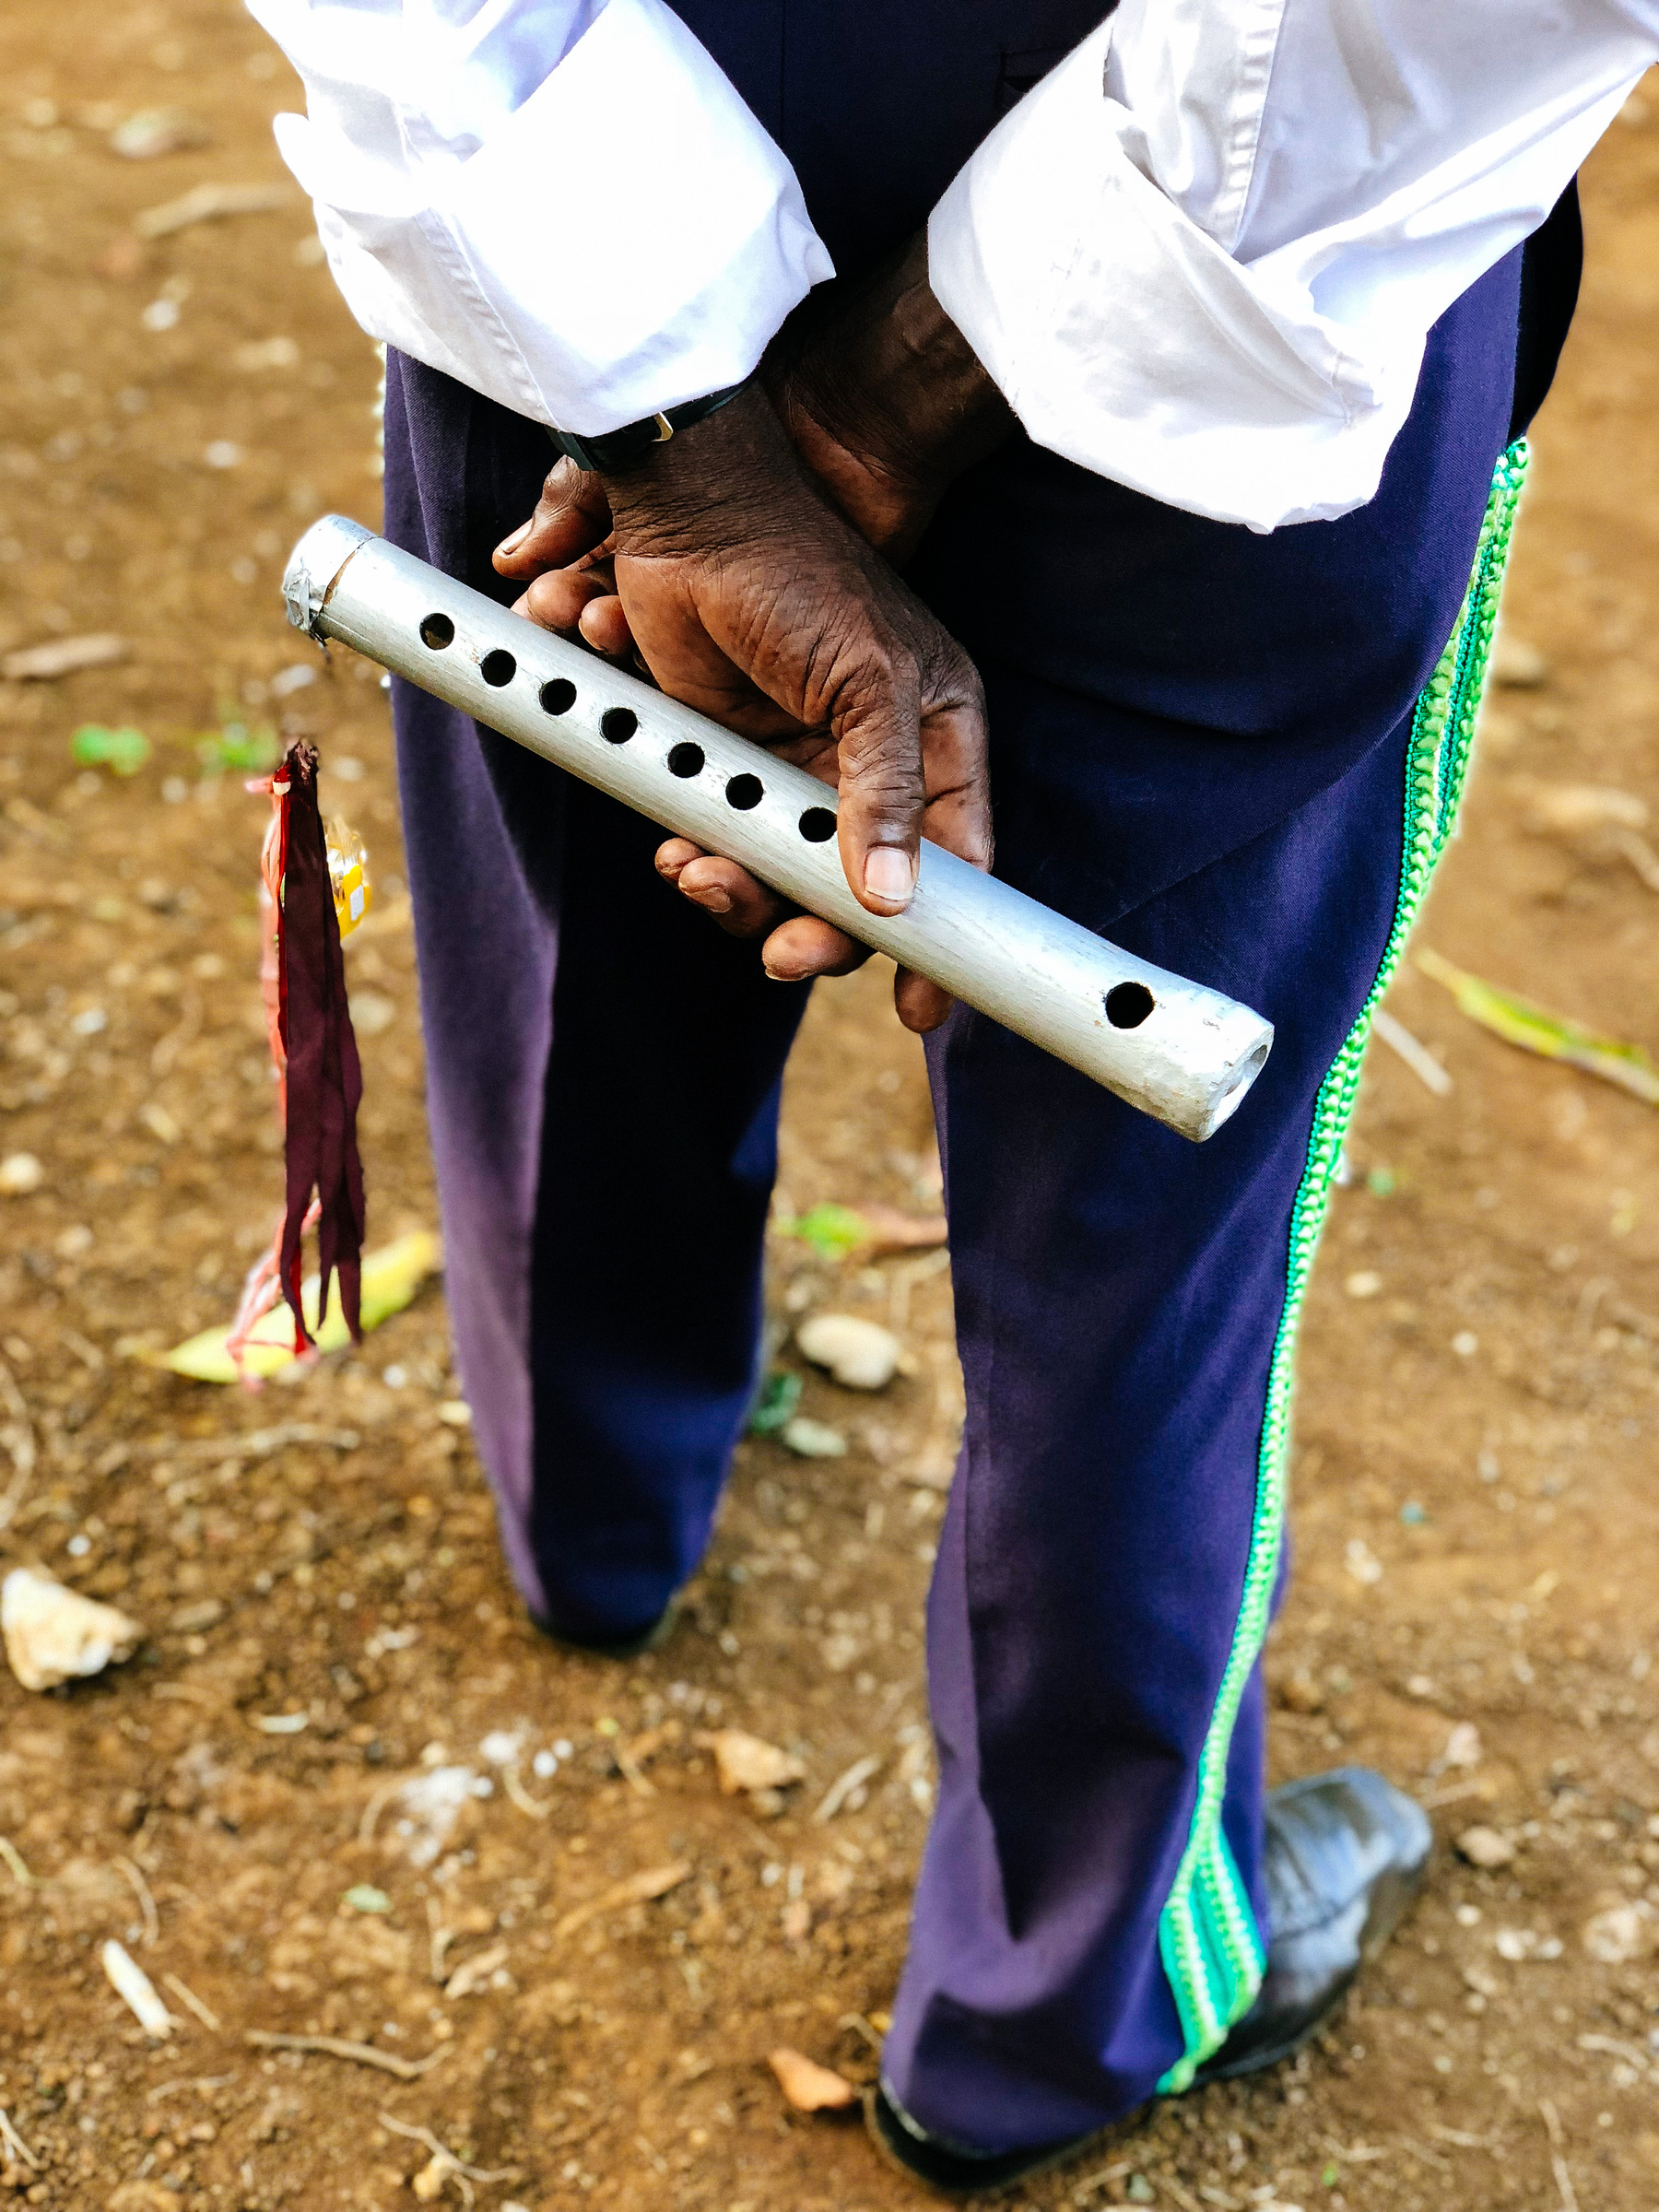 a handmade flute in the hands of a musician. We’re looking down, on his back, he’s holding the instrument behind his back. 